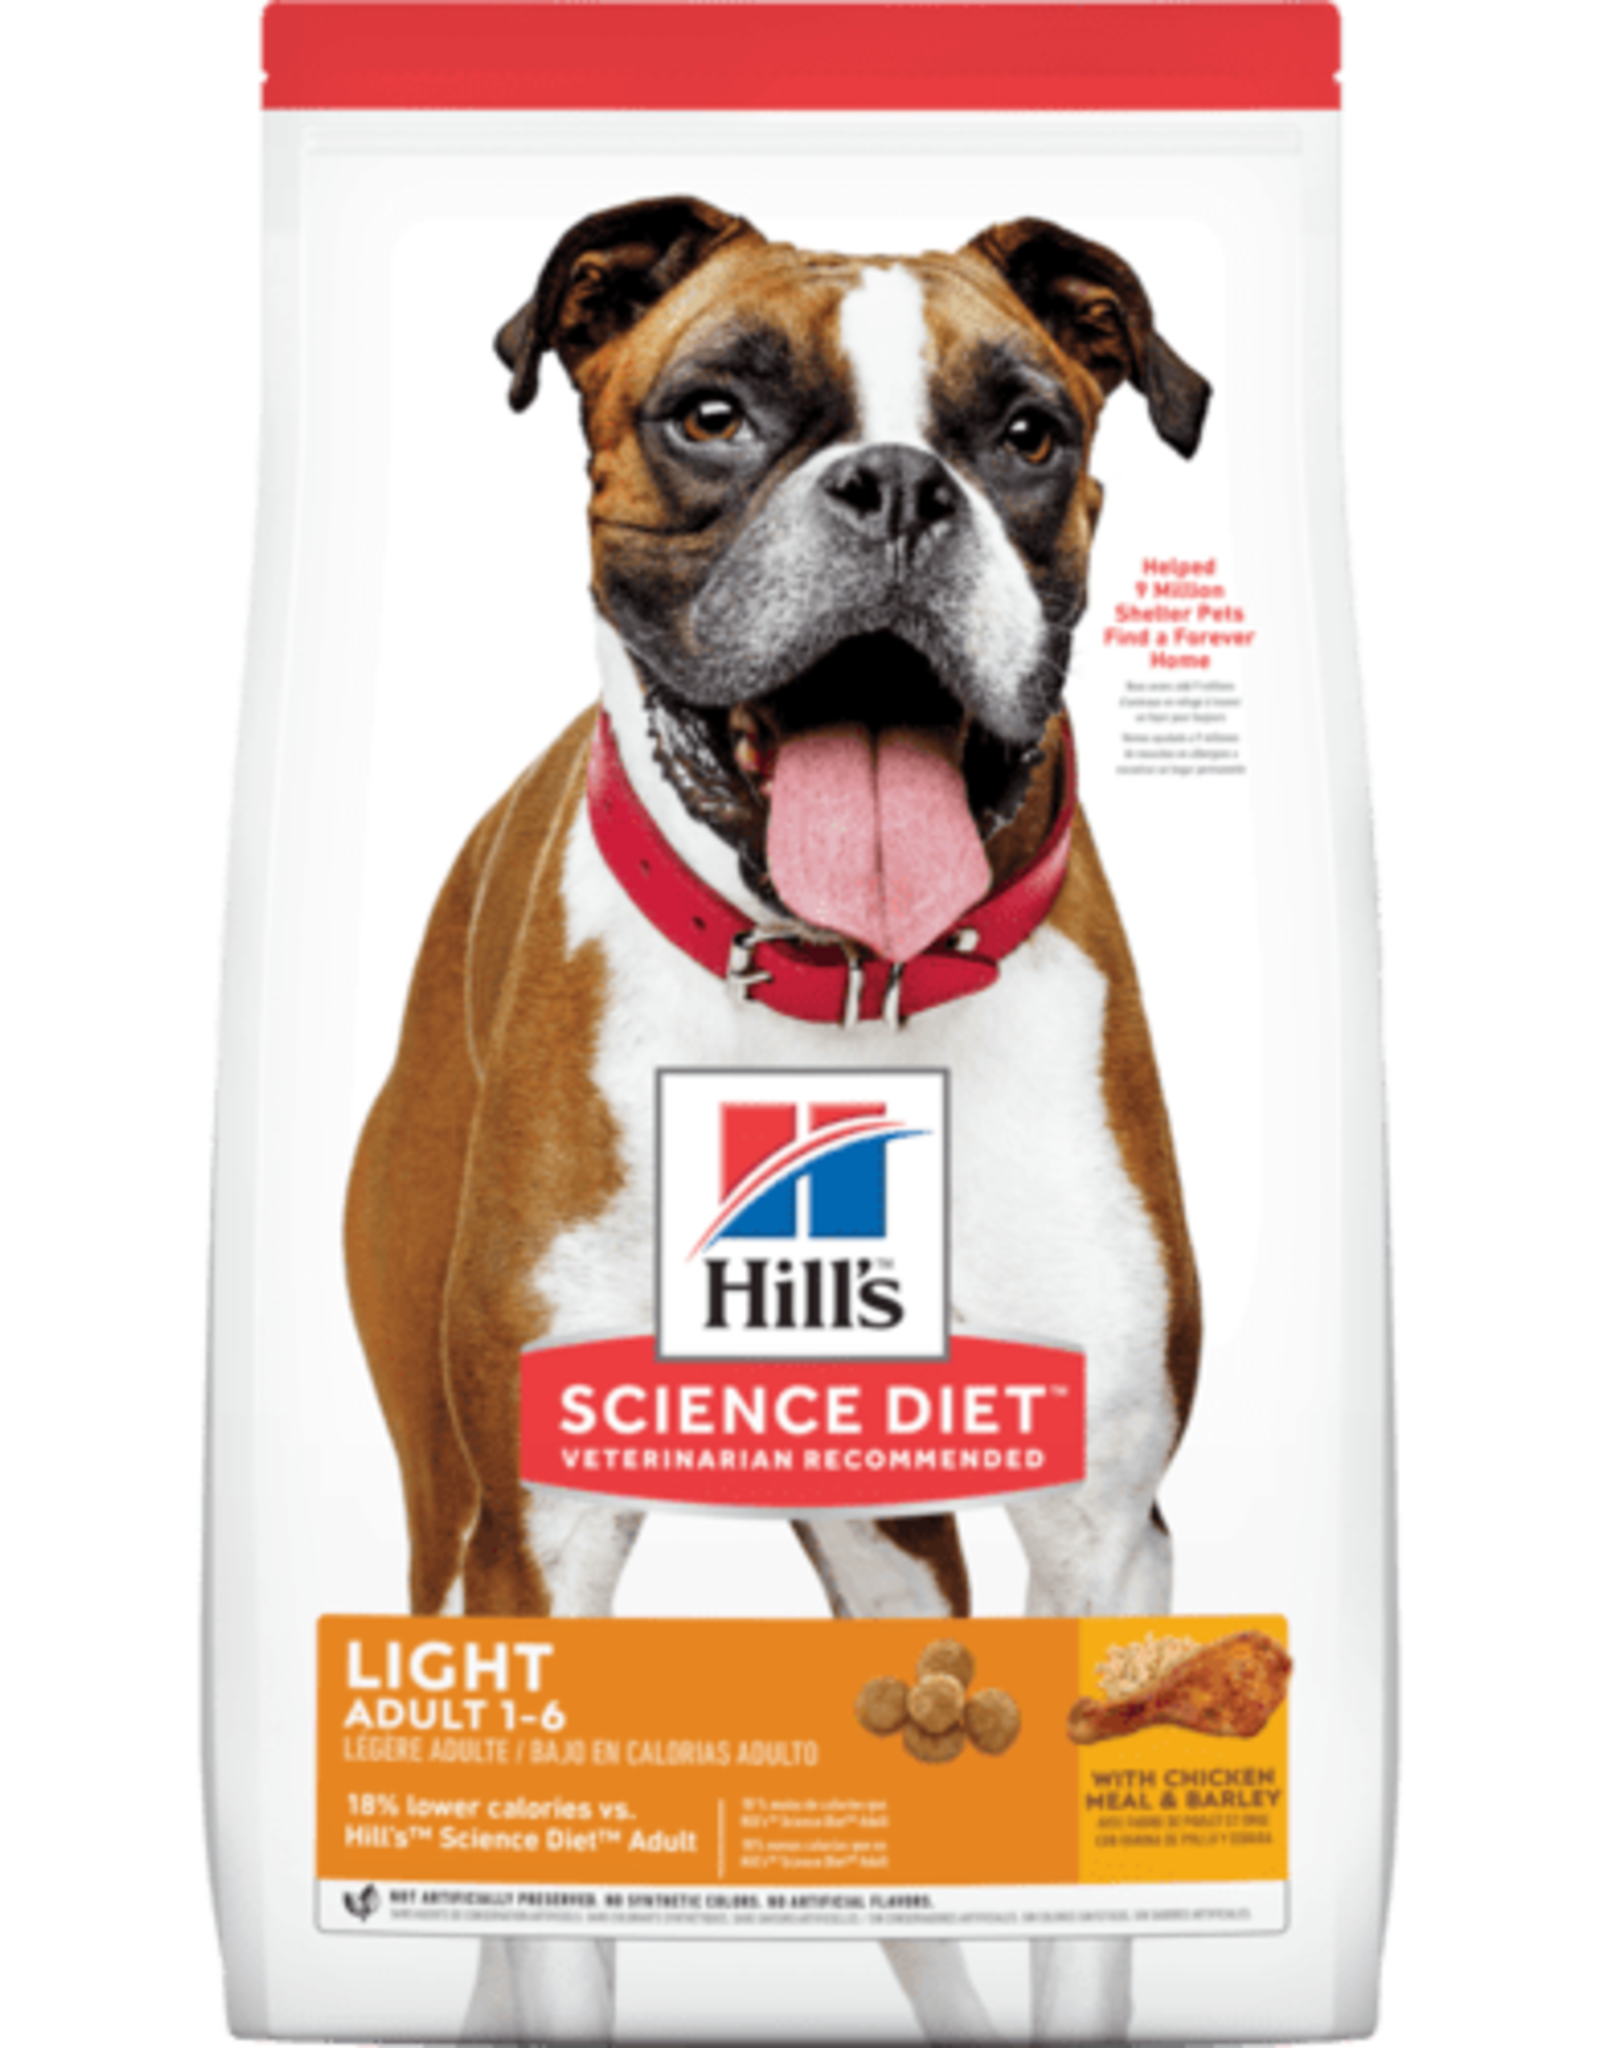 SCIENCE DIET HILL'S SCIENCE DIET CANINE LIGHT 30LBS